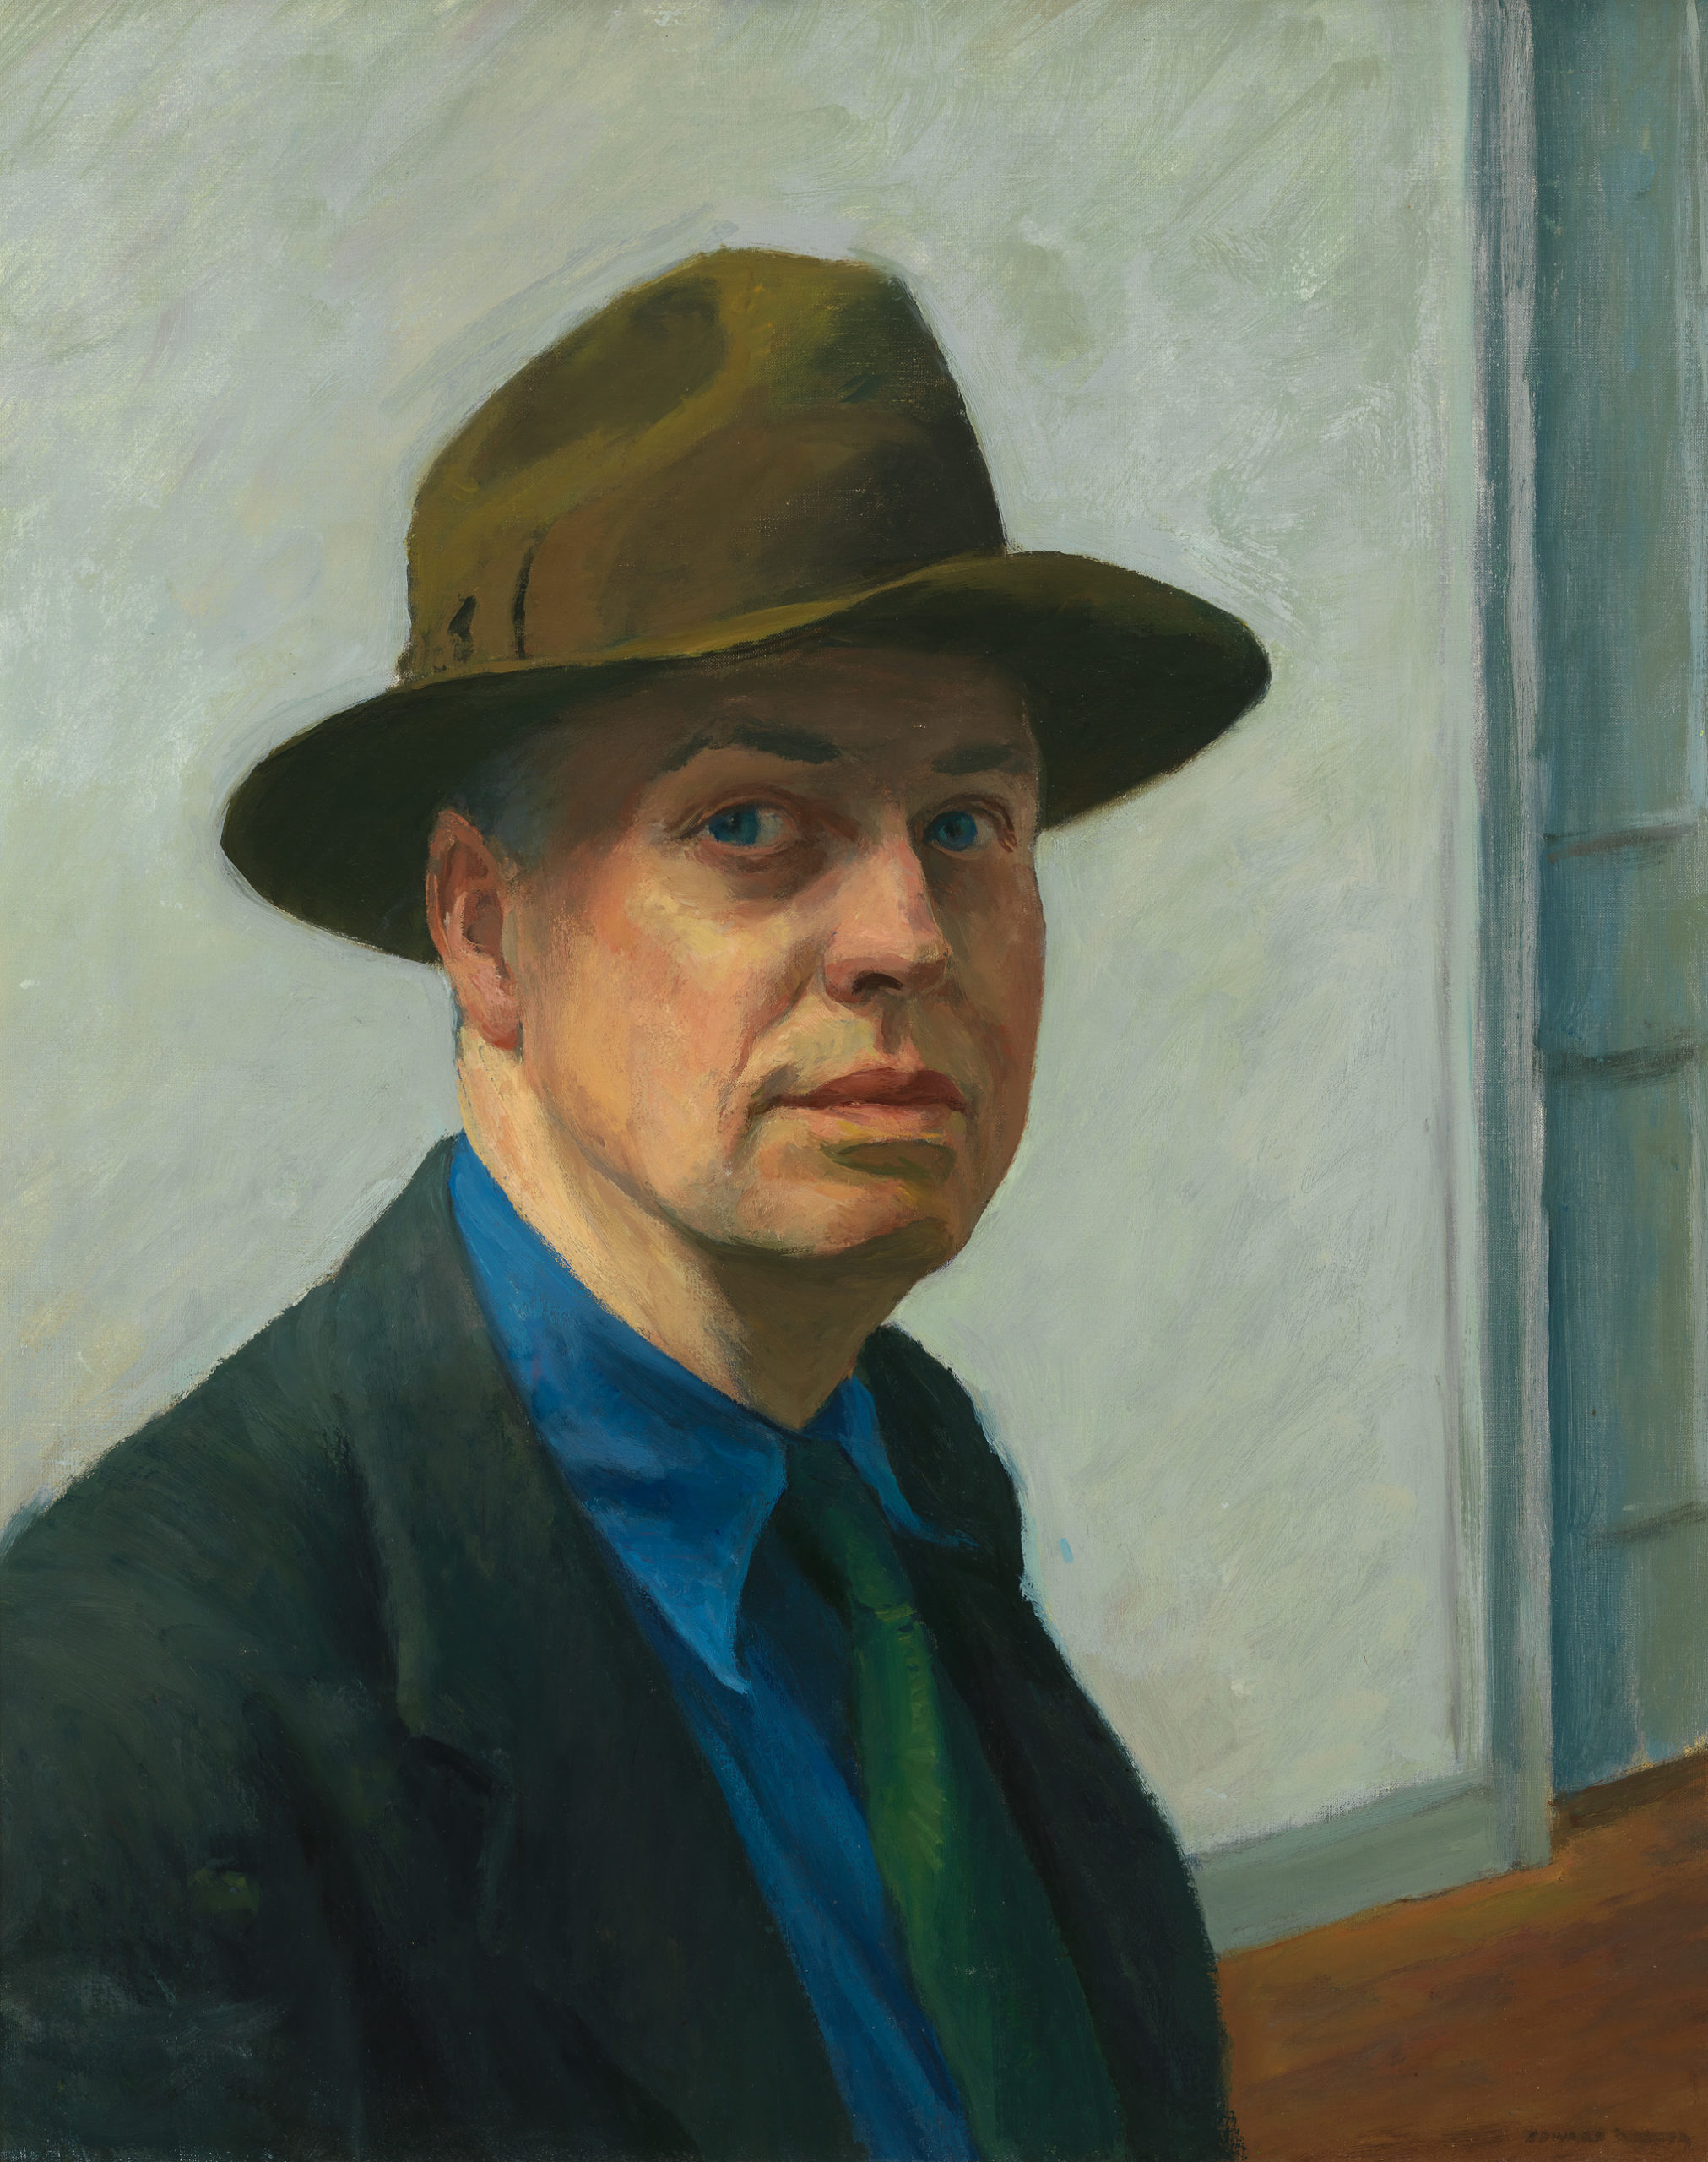 Edward Hopper, “Self-Portrait,” 1925–30. Oil on canvas, 25 3/8 × 20 3/8 in. (64.5 × 51.8 cm). Whitney Museum of American Art, New York; Josephine N. Hopper Bequest 70.1165. © 2022 Heirs of Josephine N. Hopper/Licensed by Artists Rights Society (ARS), New York